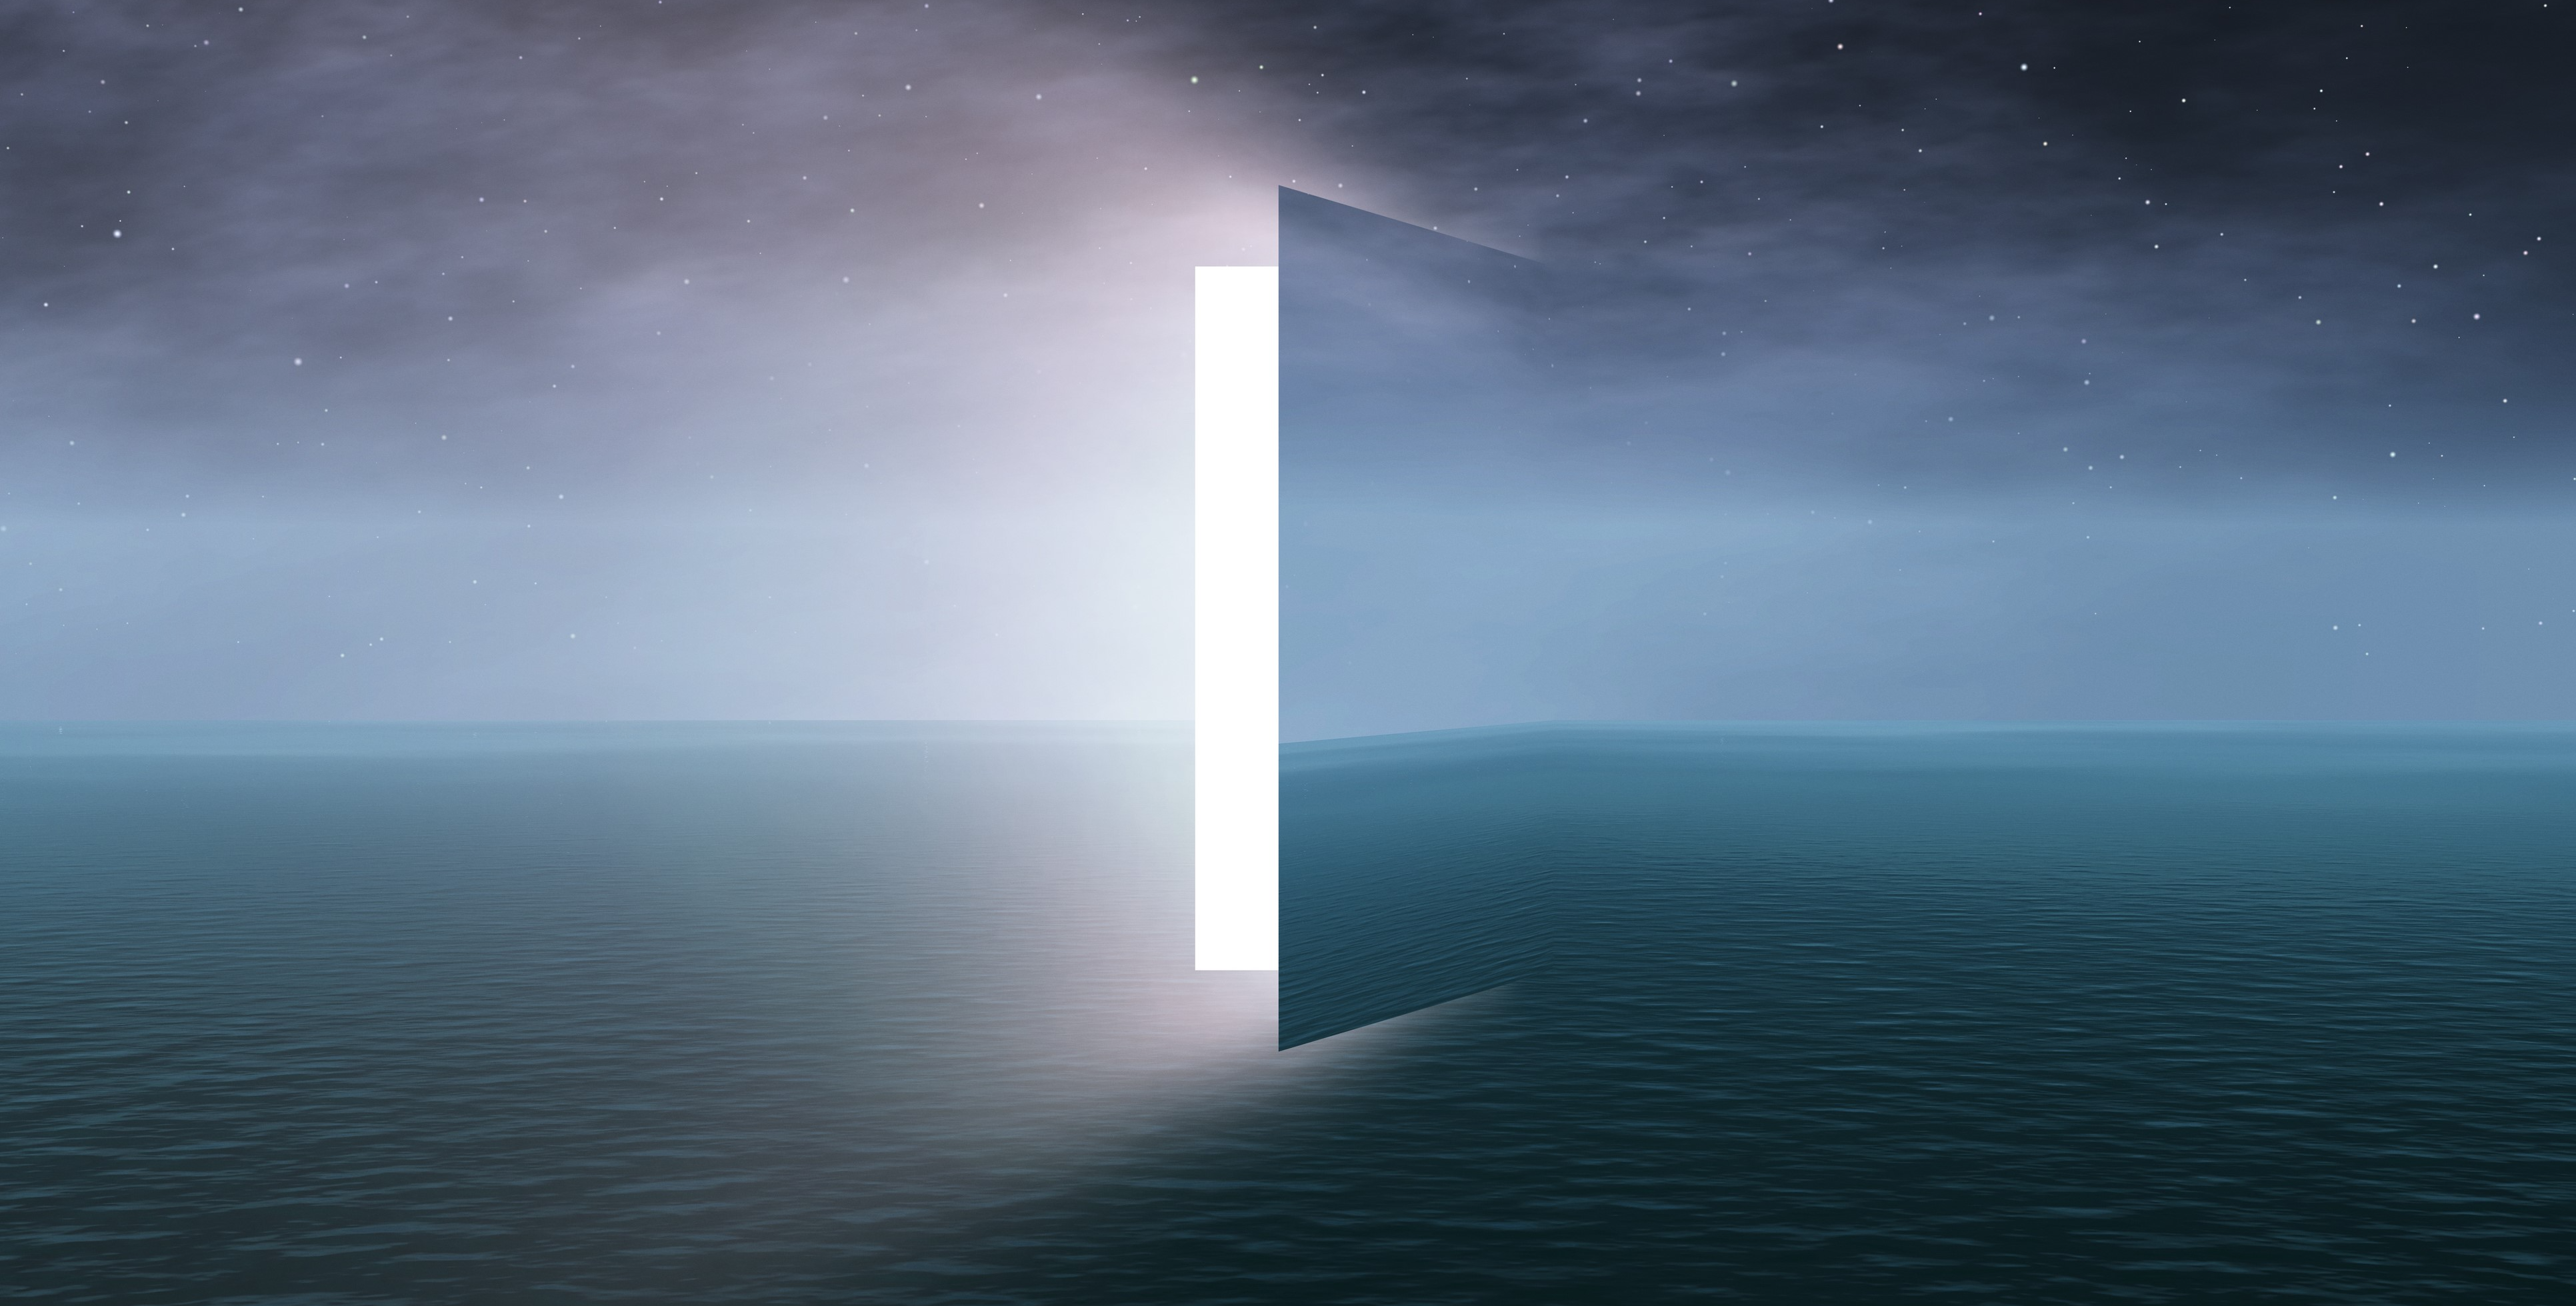 body of water and night sky with horizon and a cut out of a door with light shining through